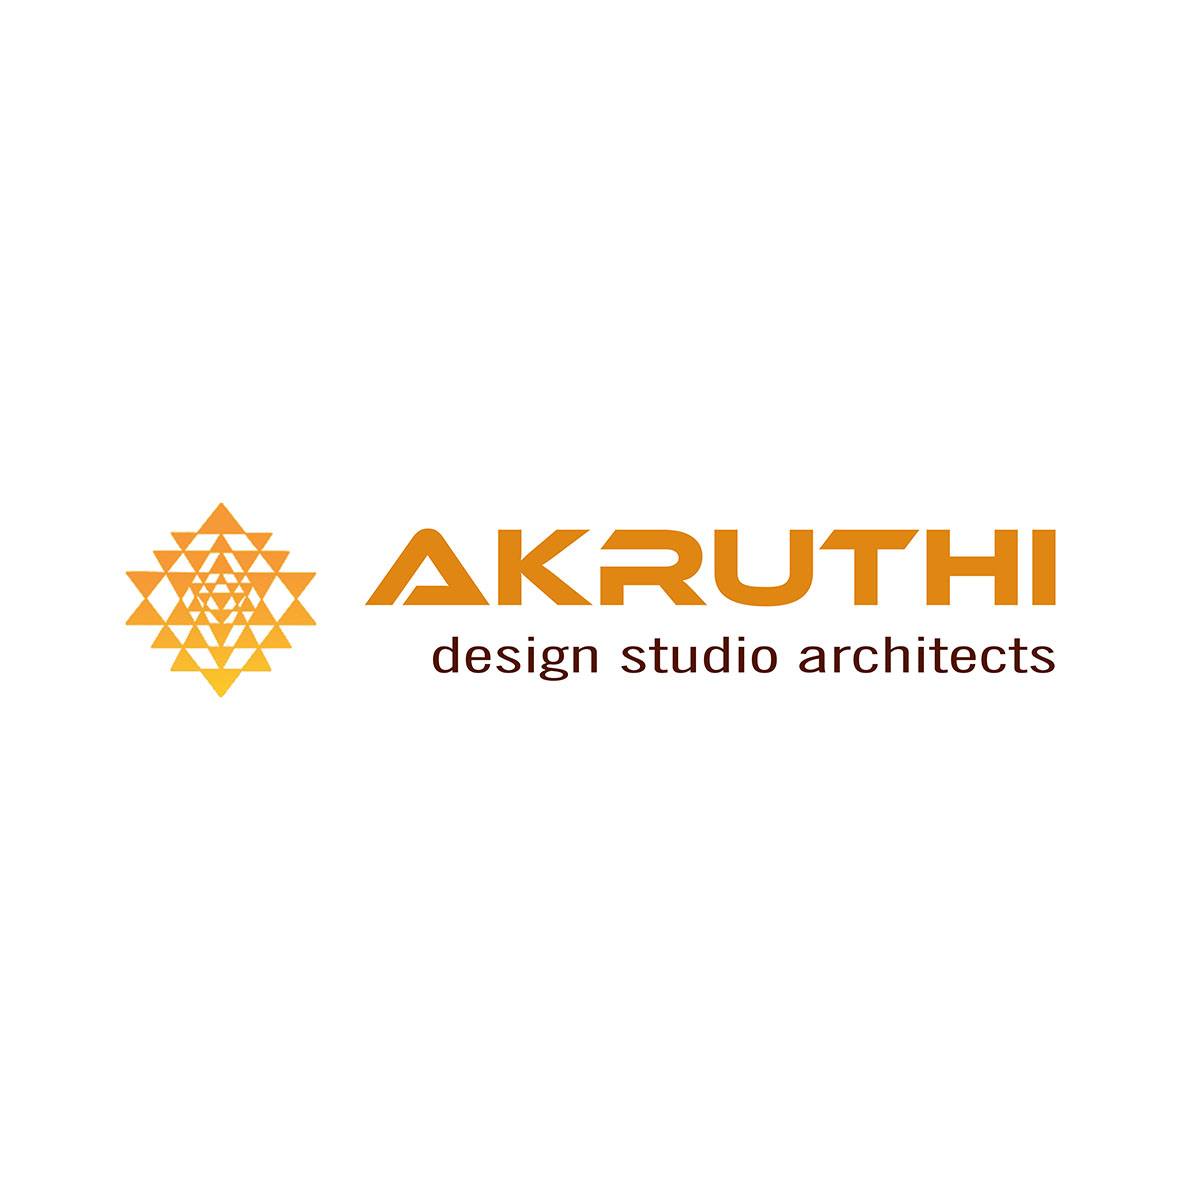 Akruthi Design Studio Architects|Accounting Services|Professional Services